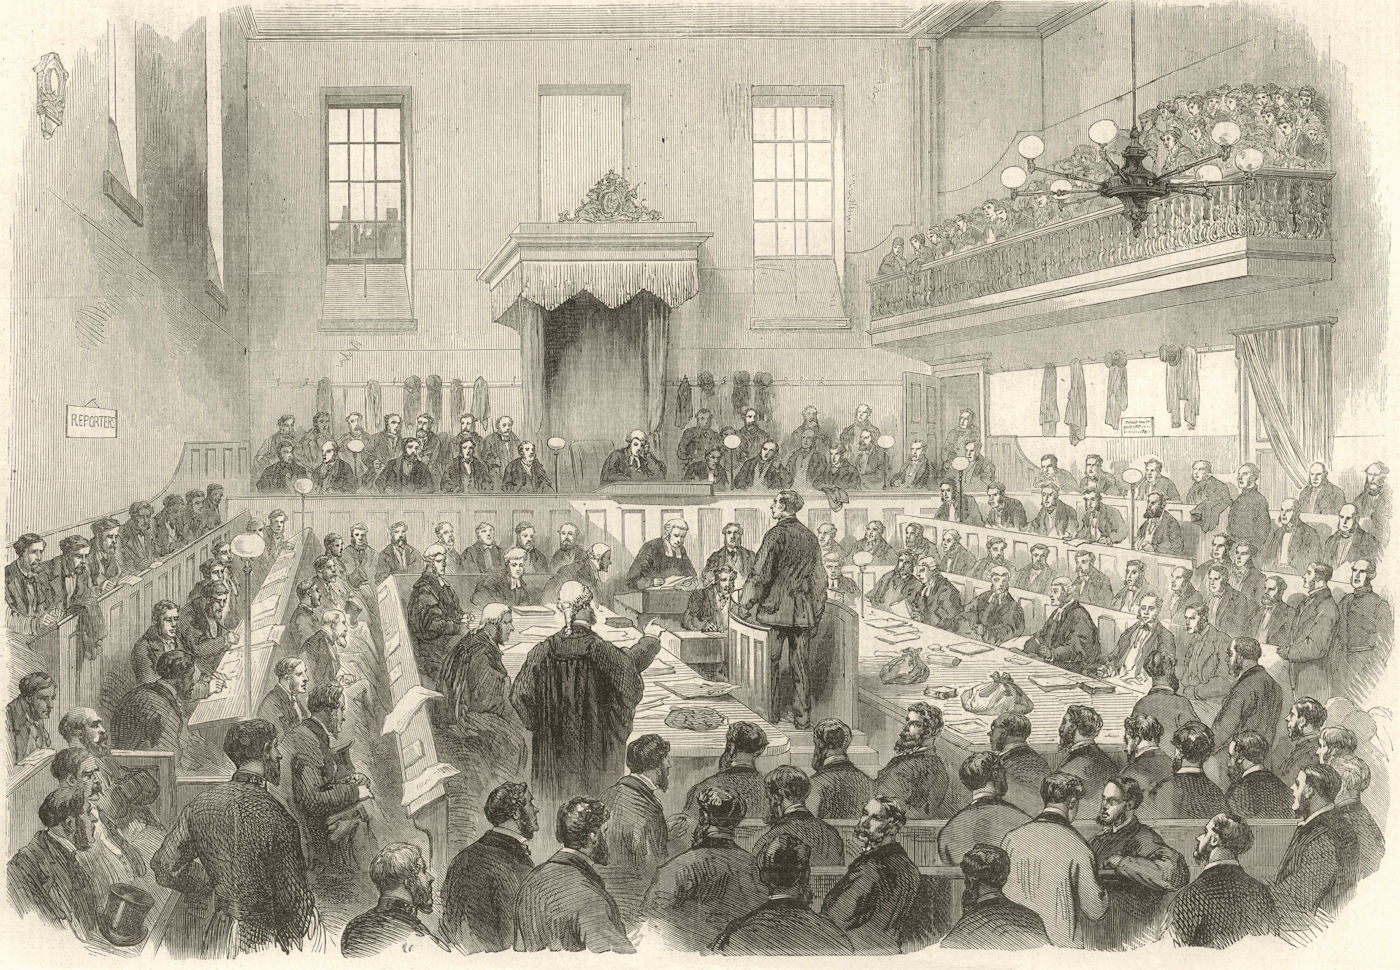 Trial of the Bradford Election Petition at the Borough courthouse 1869